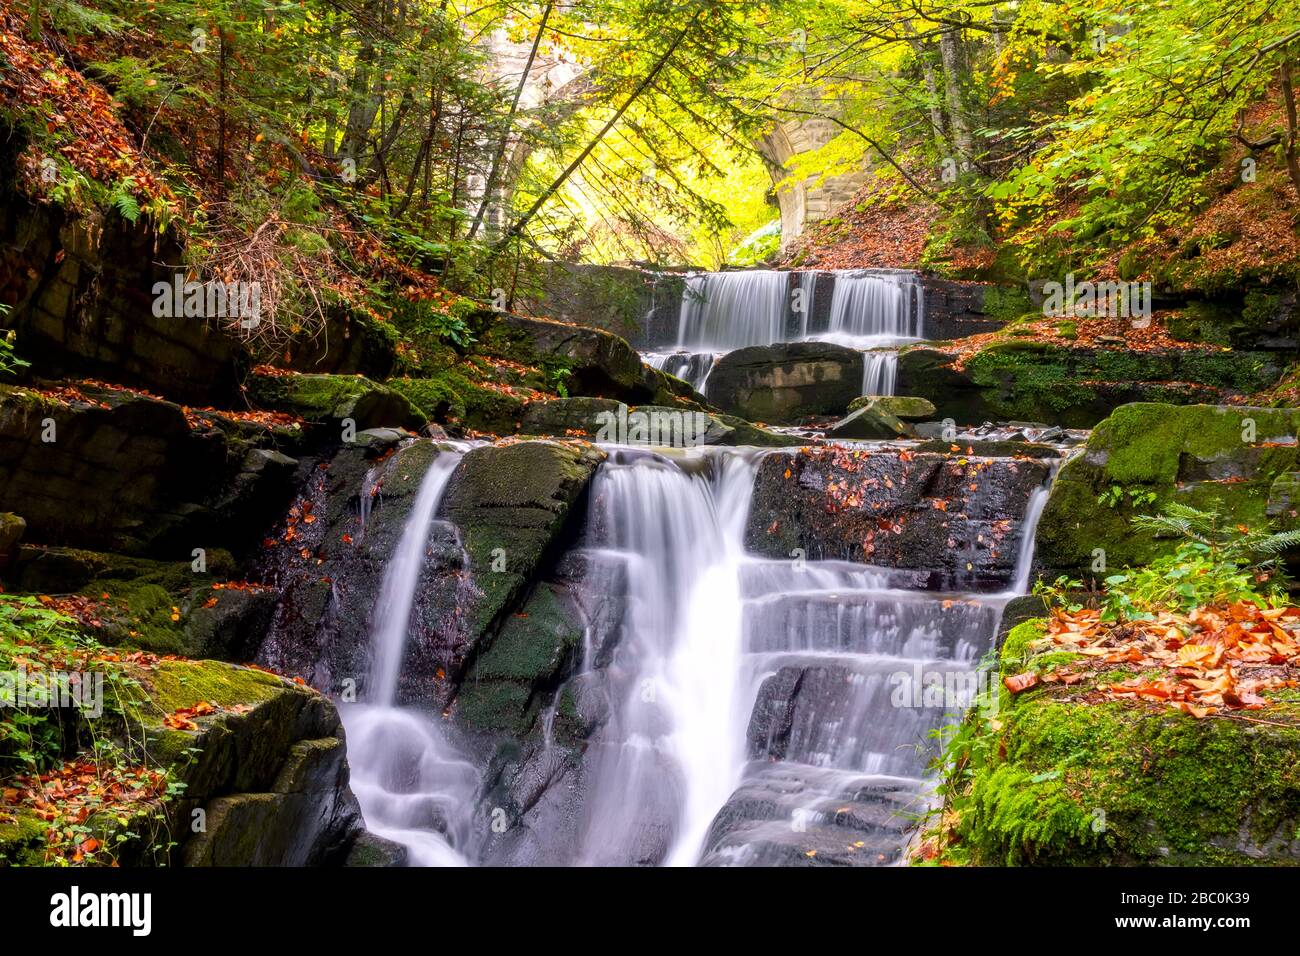 Sunny day in the summer forest. Small river and several natural waterfalls. Arch of an old stone bridge Stock Photo